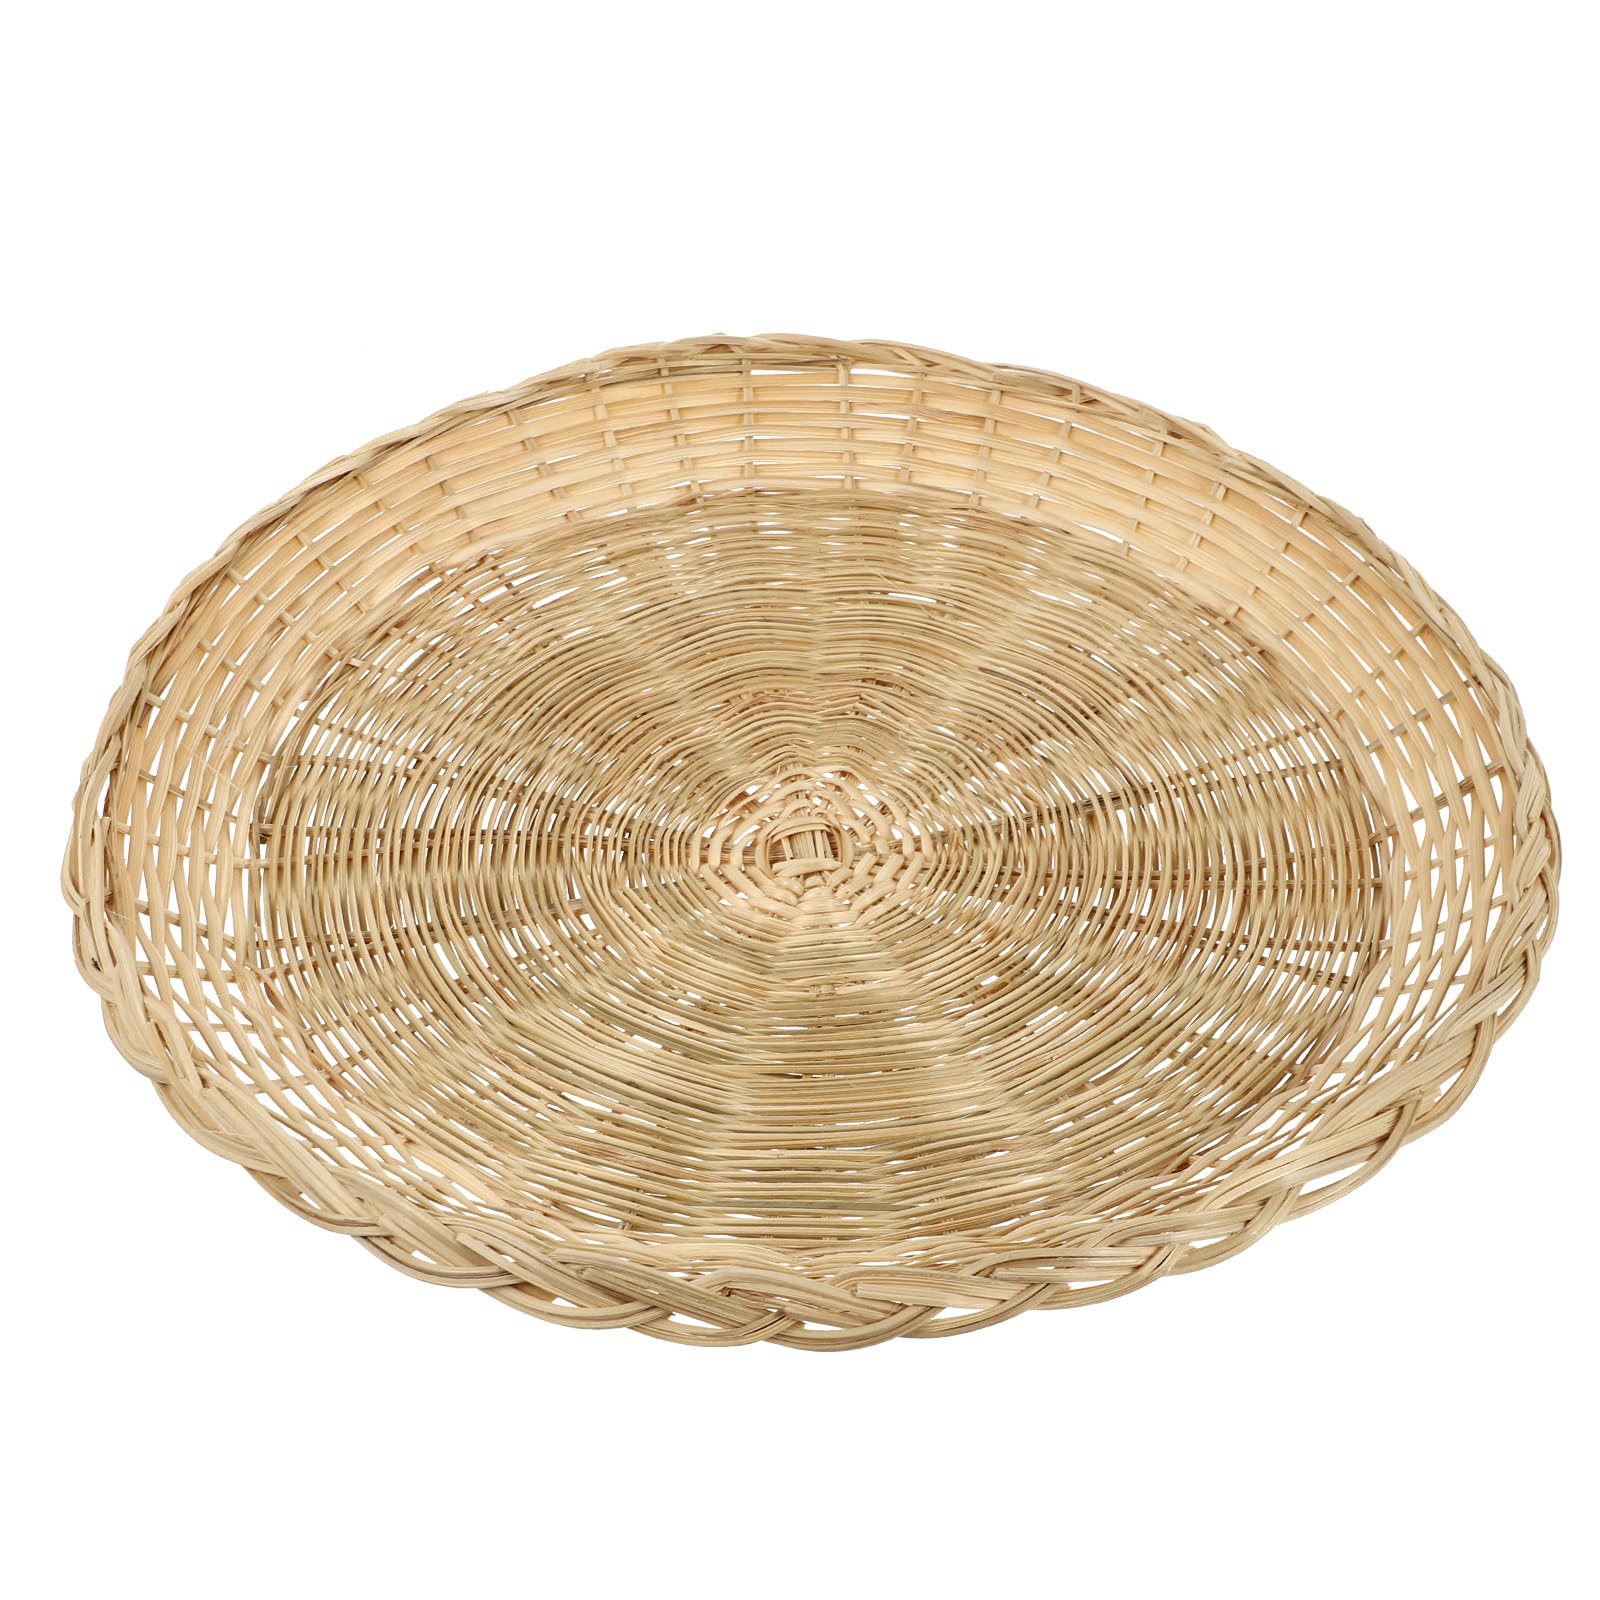 Garneck Wicker Paper Plate Holders, Wicker Reusable Natural Charger Plates, Reusable Plate Holders for Party BBQ Outdoor Cooking Picnic (10 INCH)